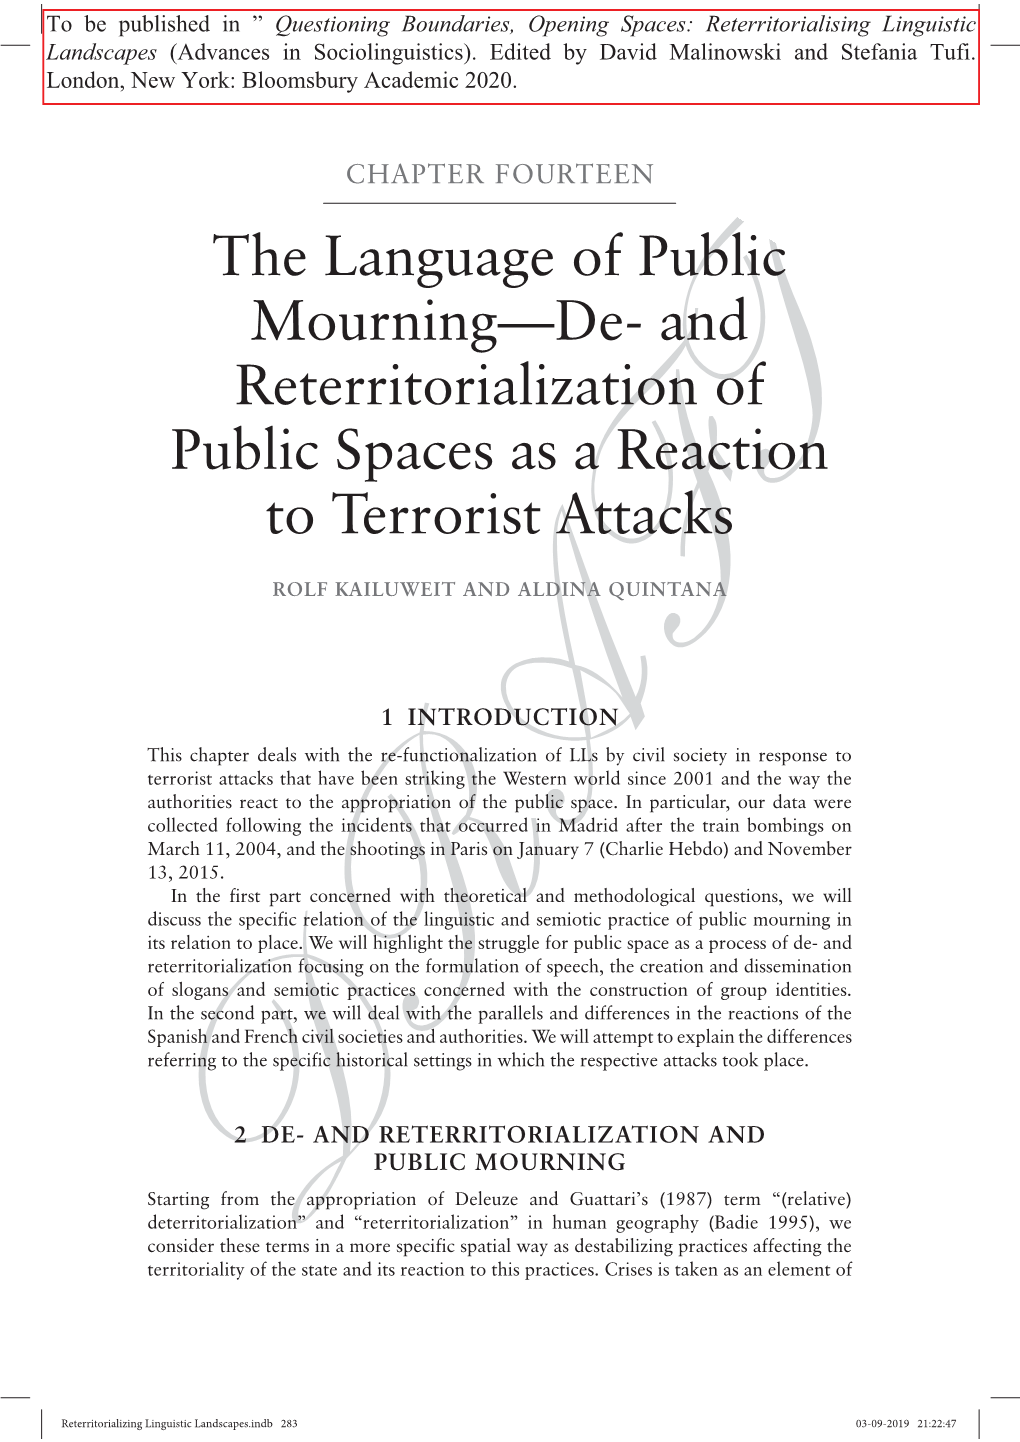 The Language of Public Mourning—De- and Reterritorialization of Public Spaces As a Reaction to Terrorist Attacks